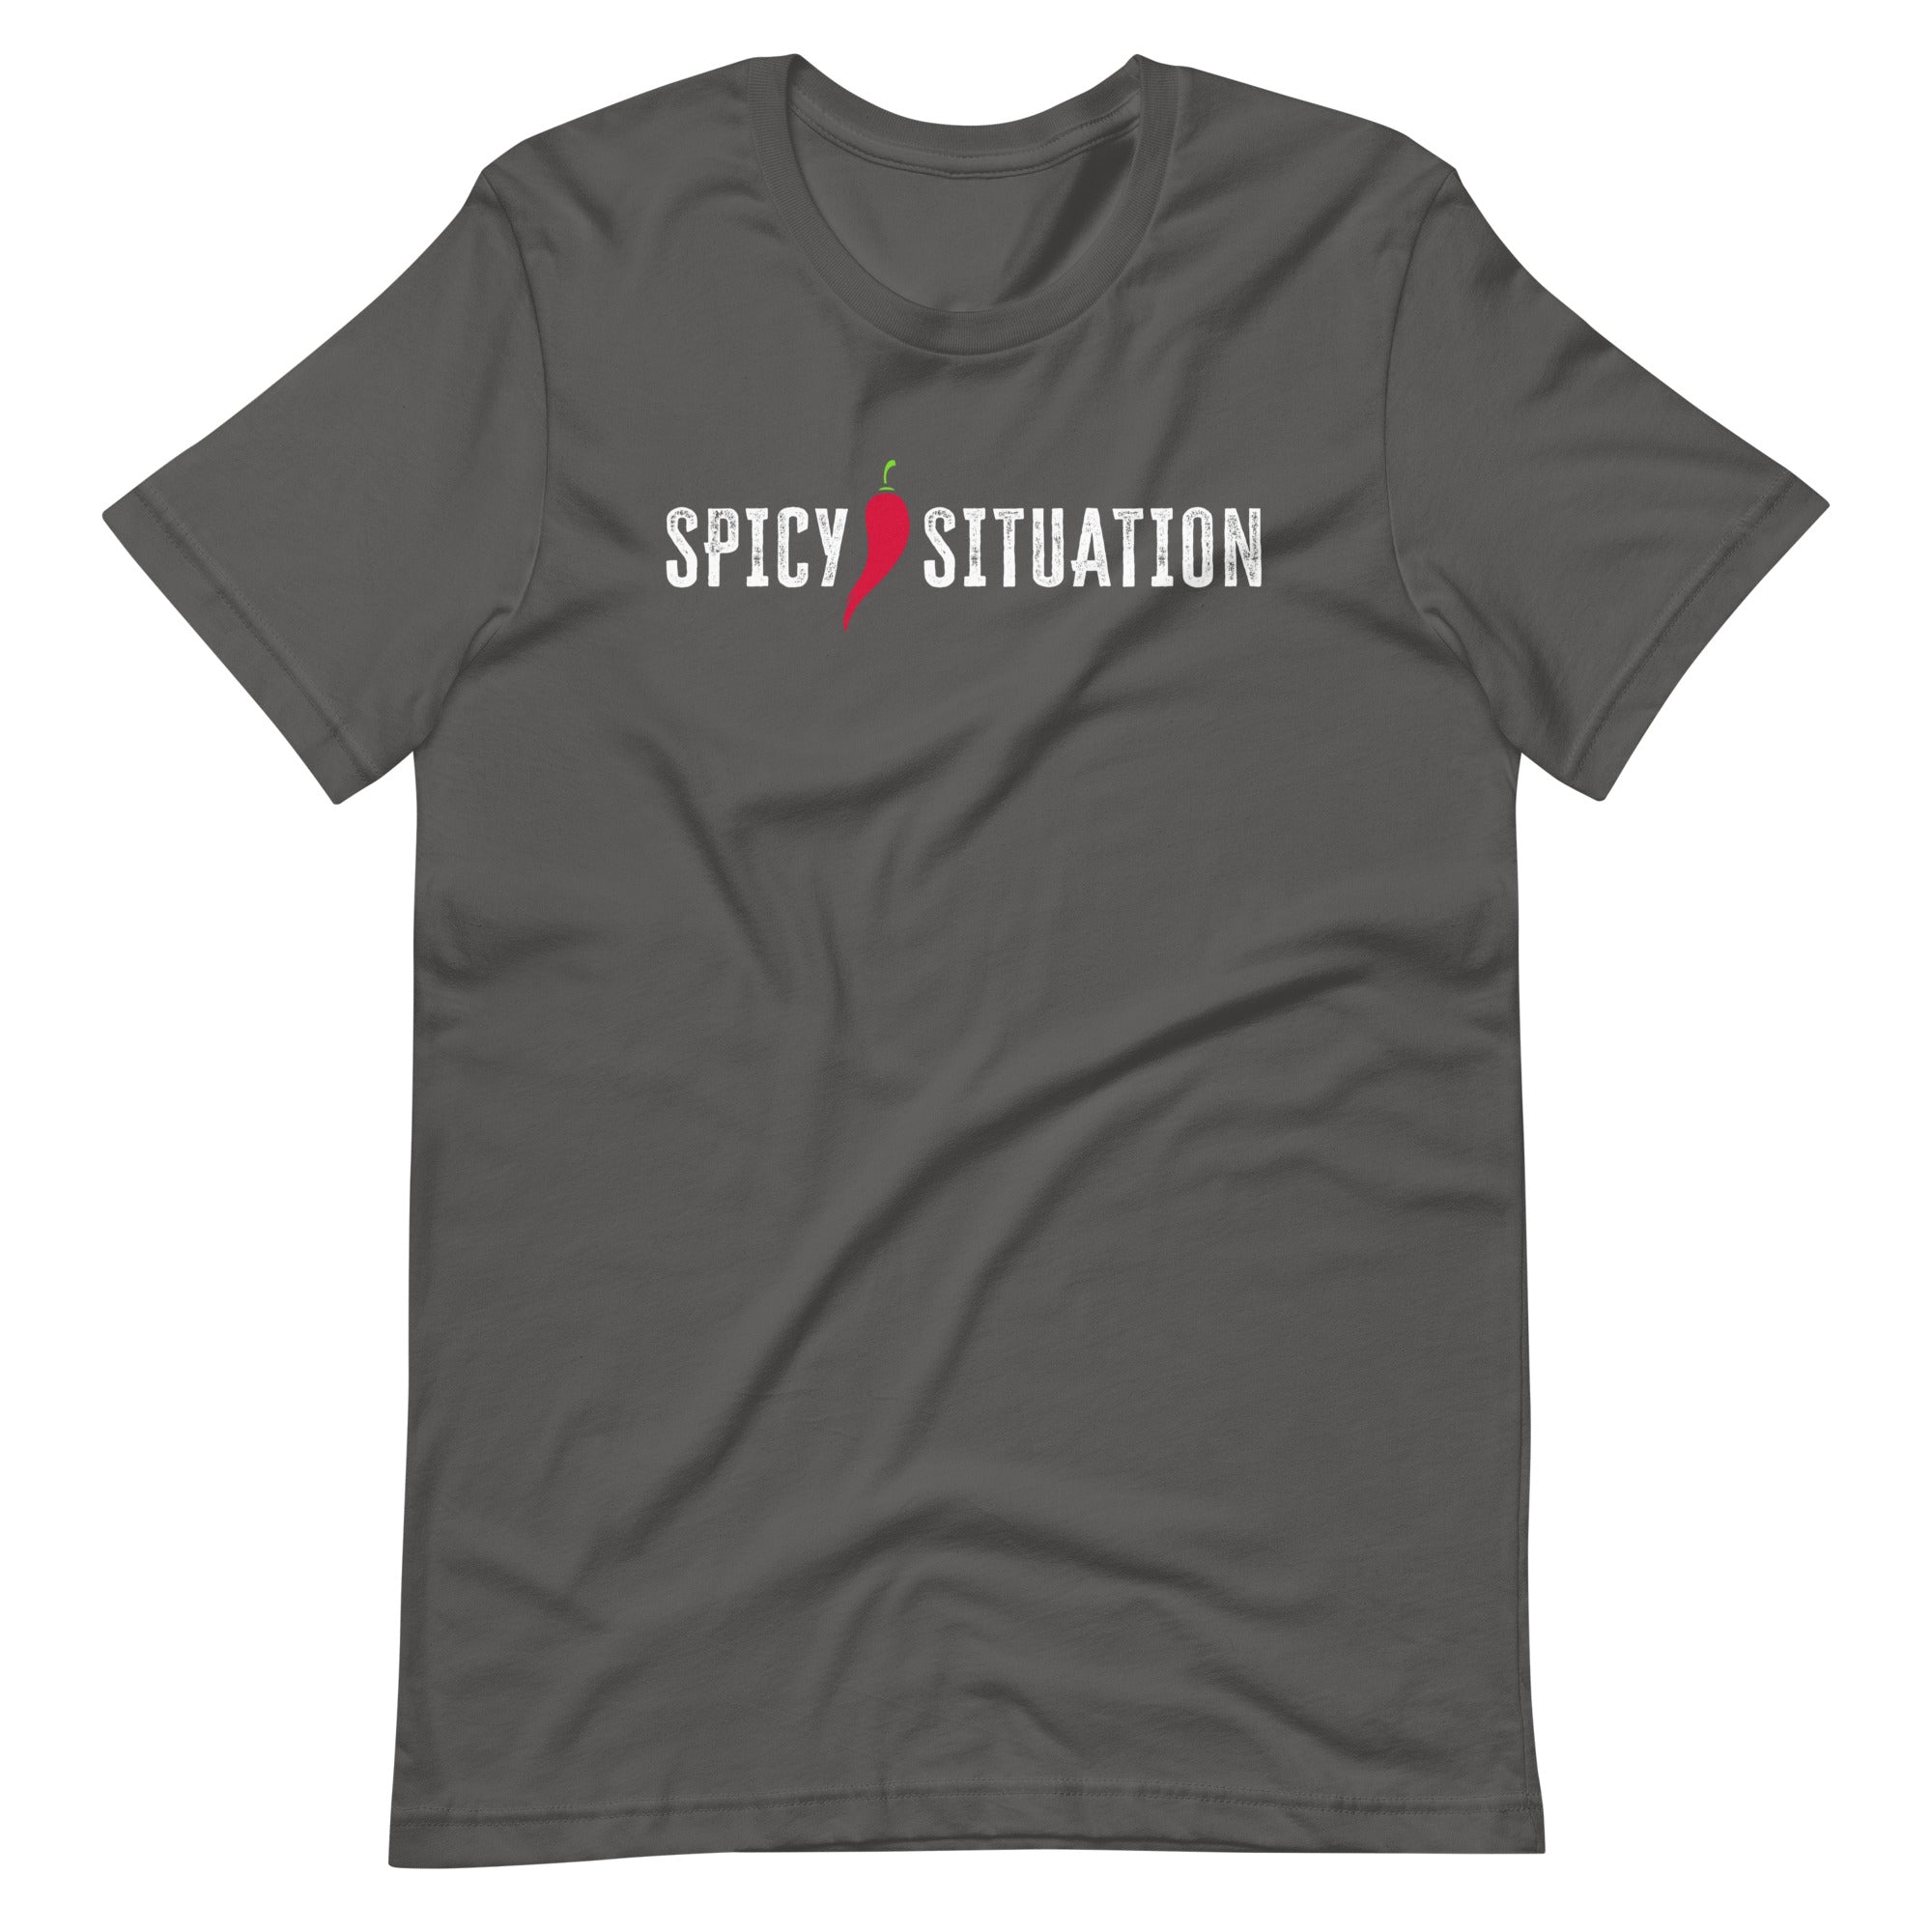 Mike Sorrentino Spicy Situation Shirt